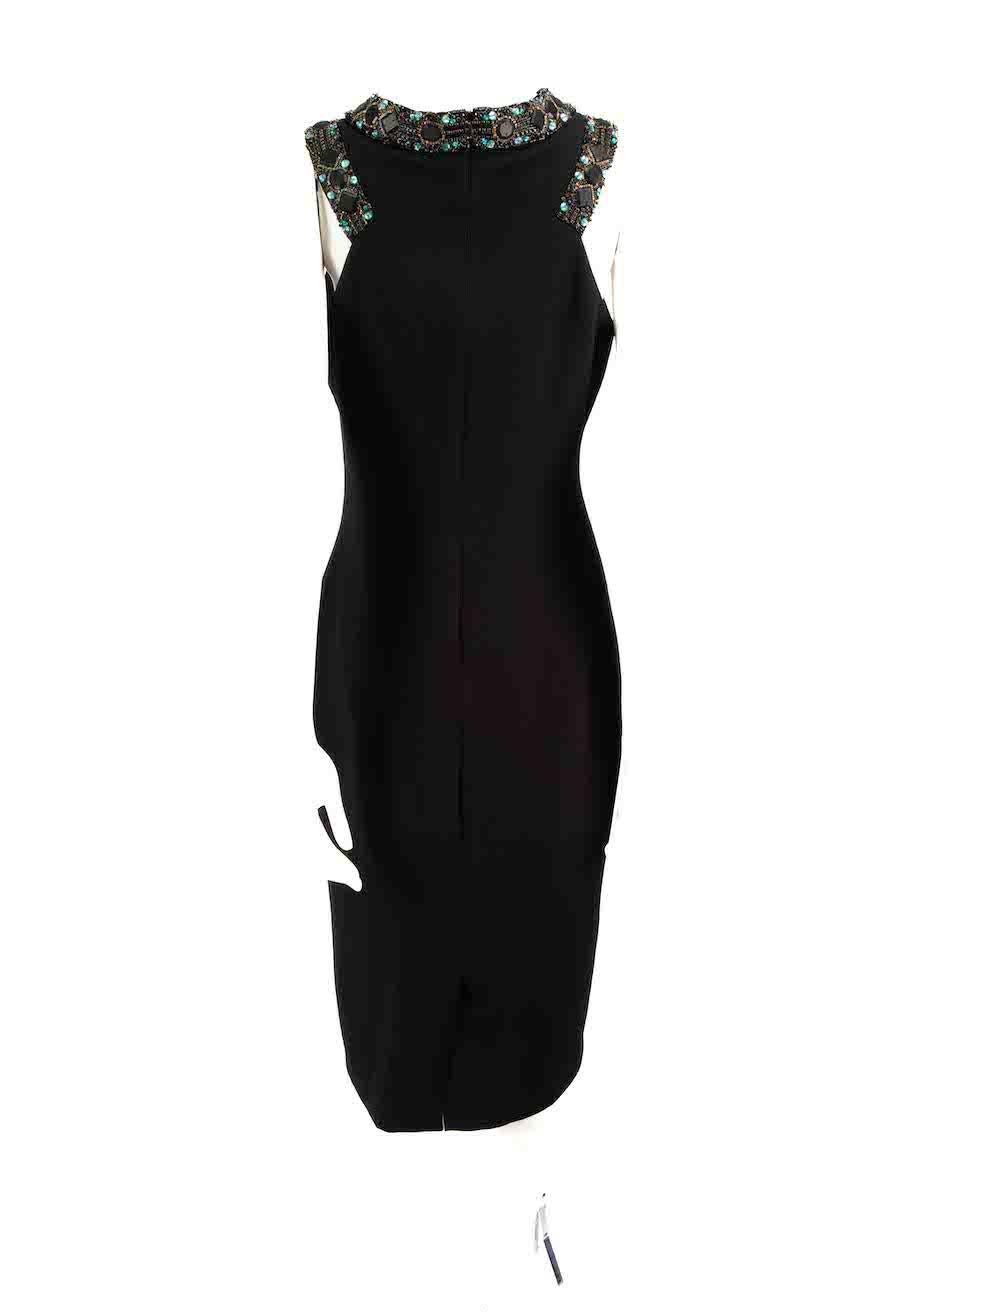 Badgley Mischka Black Embellished Midi Dress Size L In Excellent Condition For Sale In London, GB